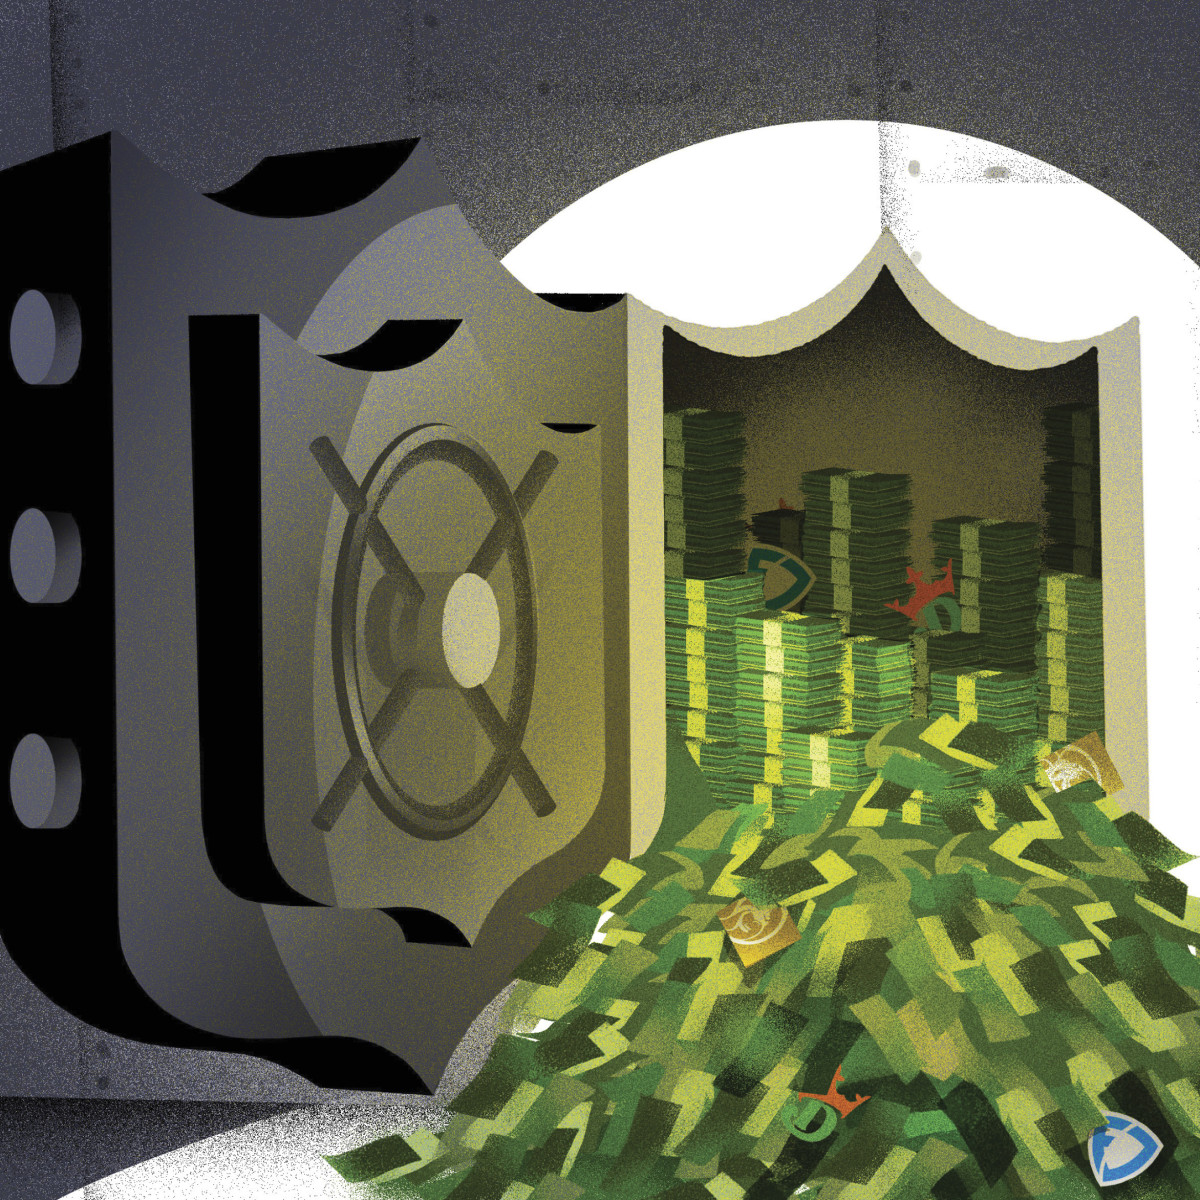 An illustration of a vault shaped like the NFL shield opened with money spilling out and logos of online sports betting sites mixed in.